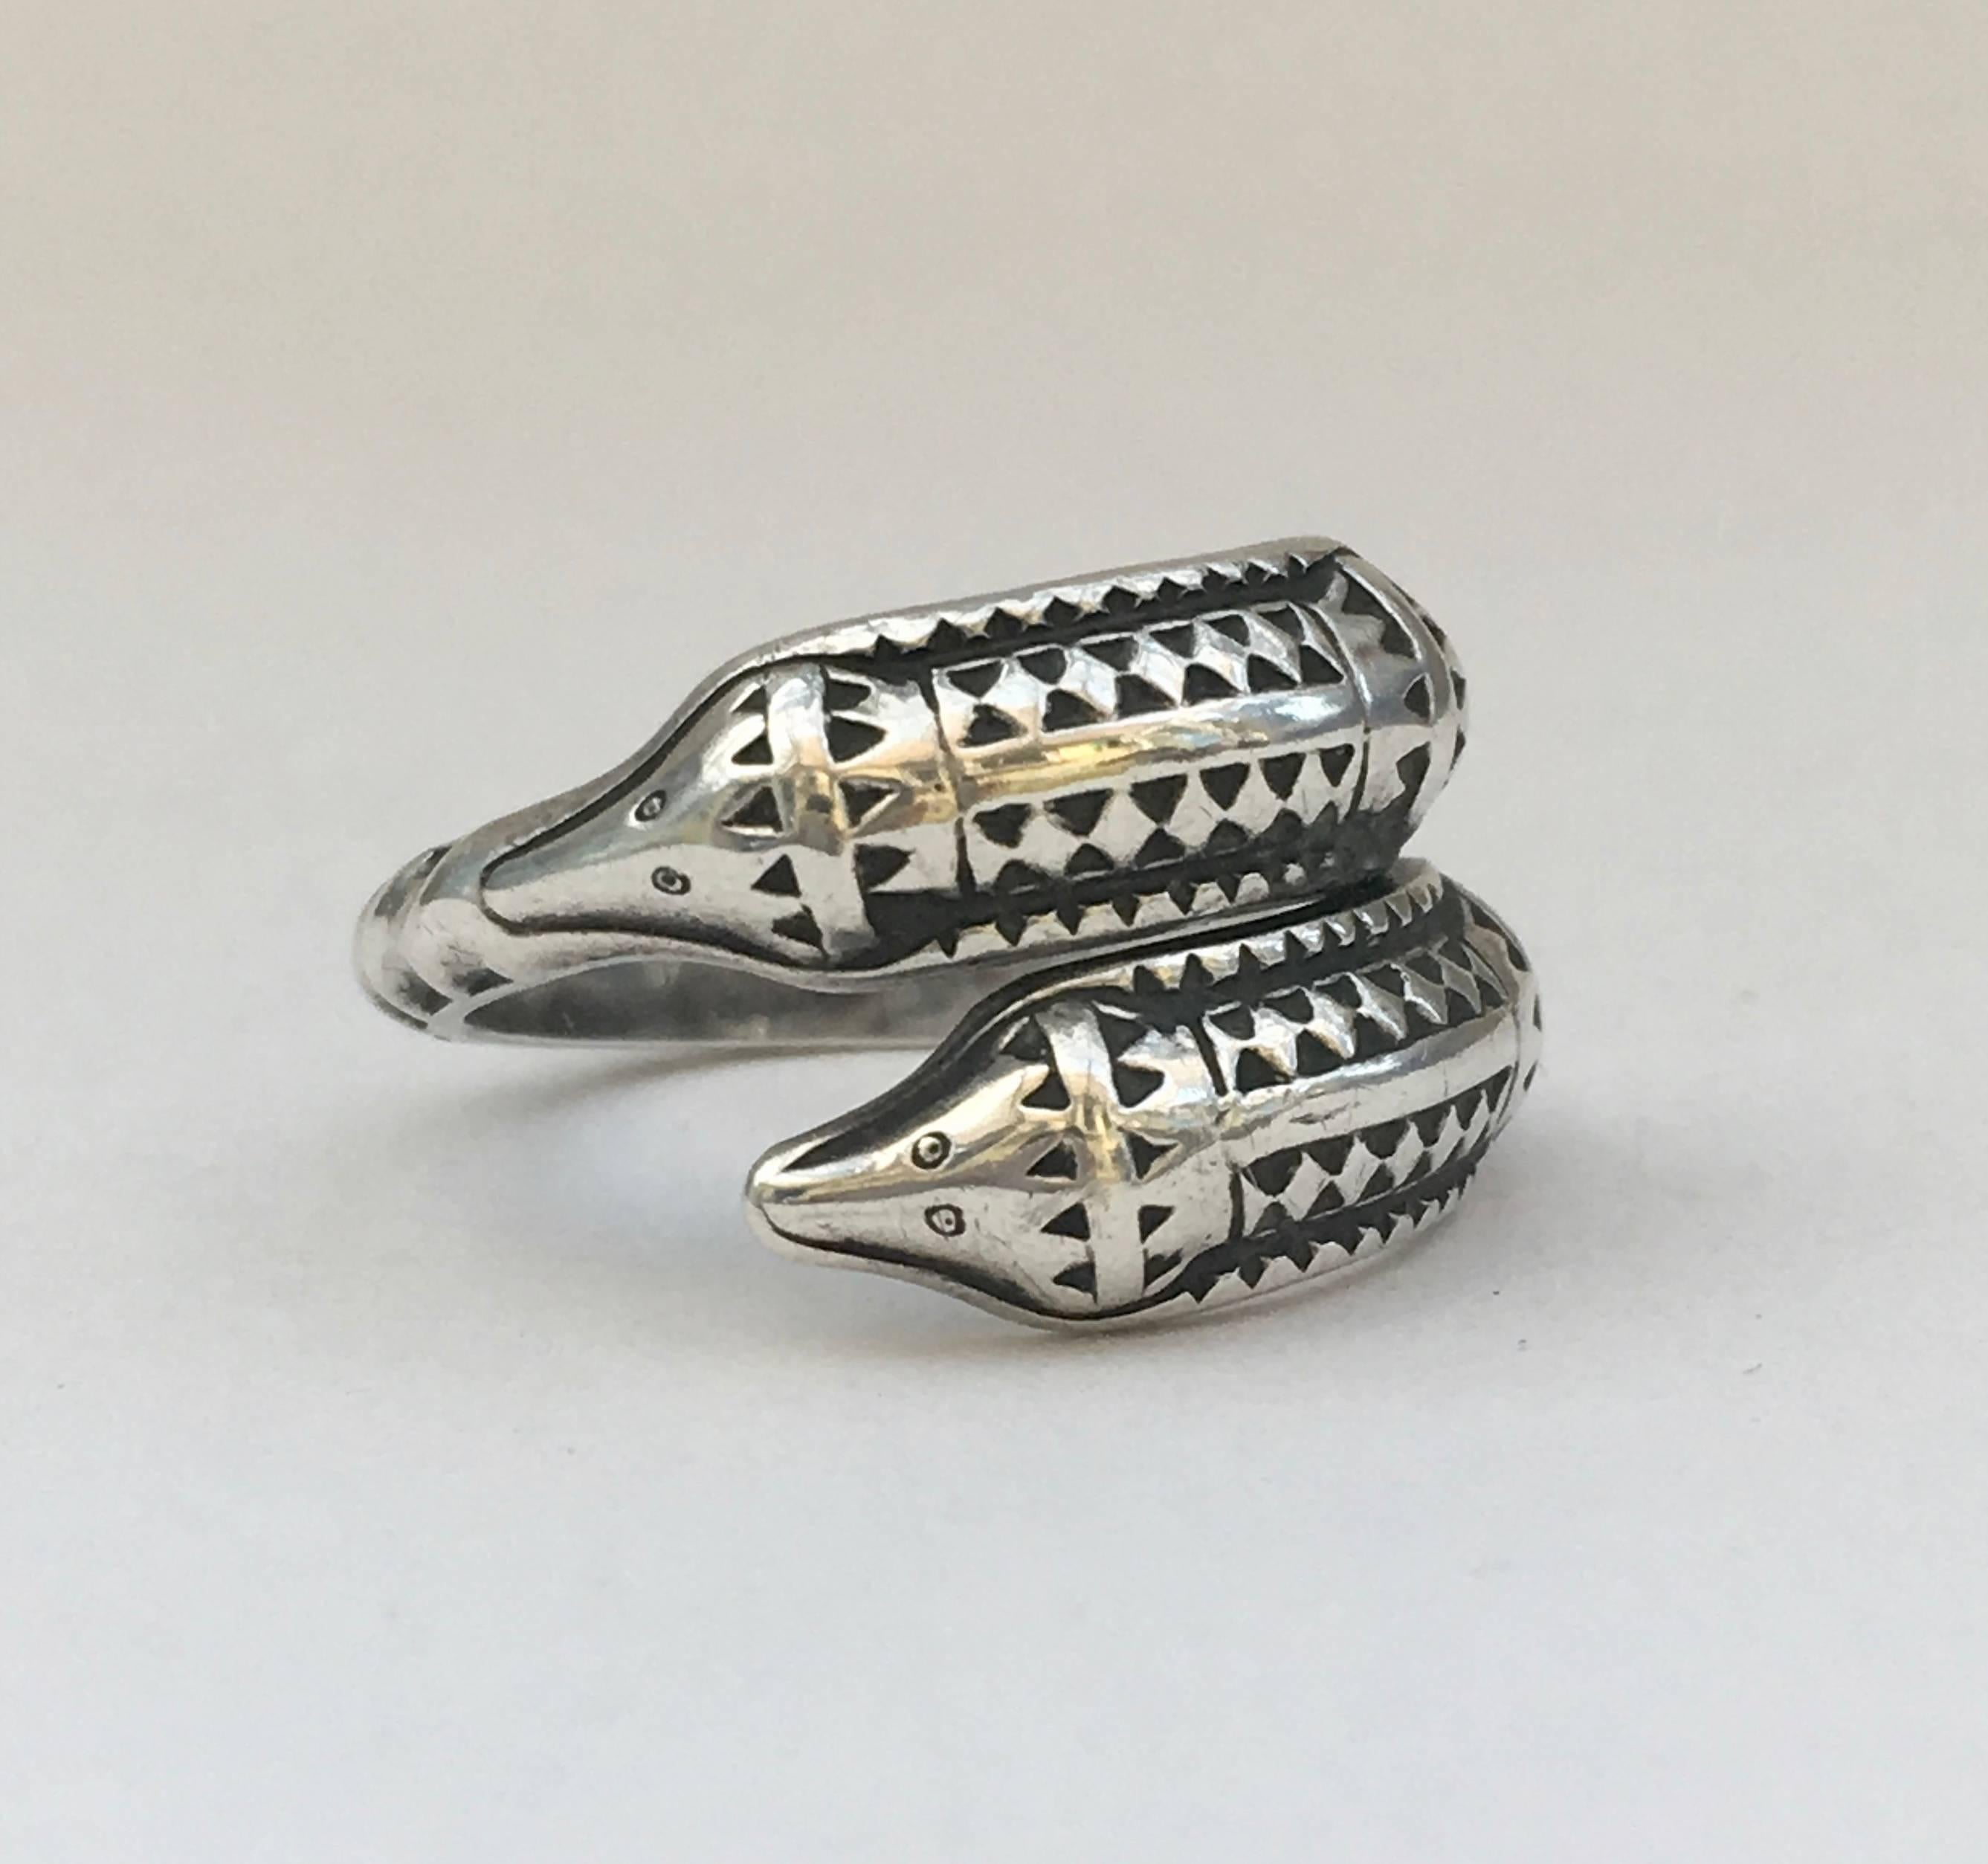 This unusual sterling silver snake ring is strikingly reminiscent of Viking jewellery and the markings tell us that it is indeed a copy of an original piece dating back to 300 A.D. 

Created by well-known designer, David Andersen of Norway (founded